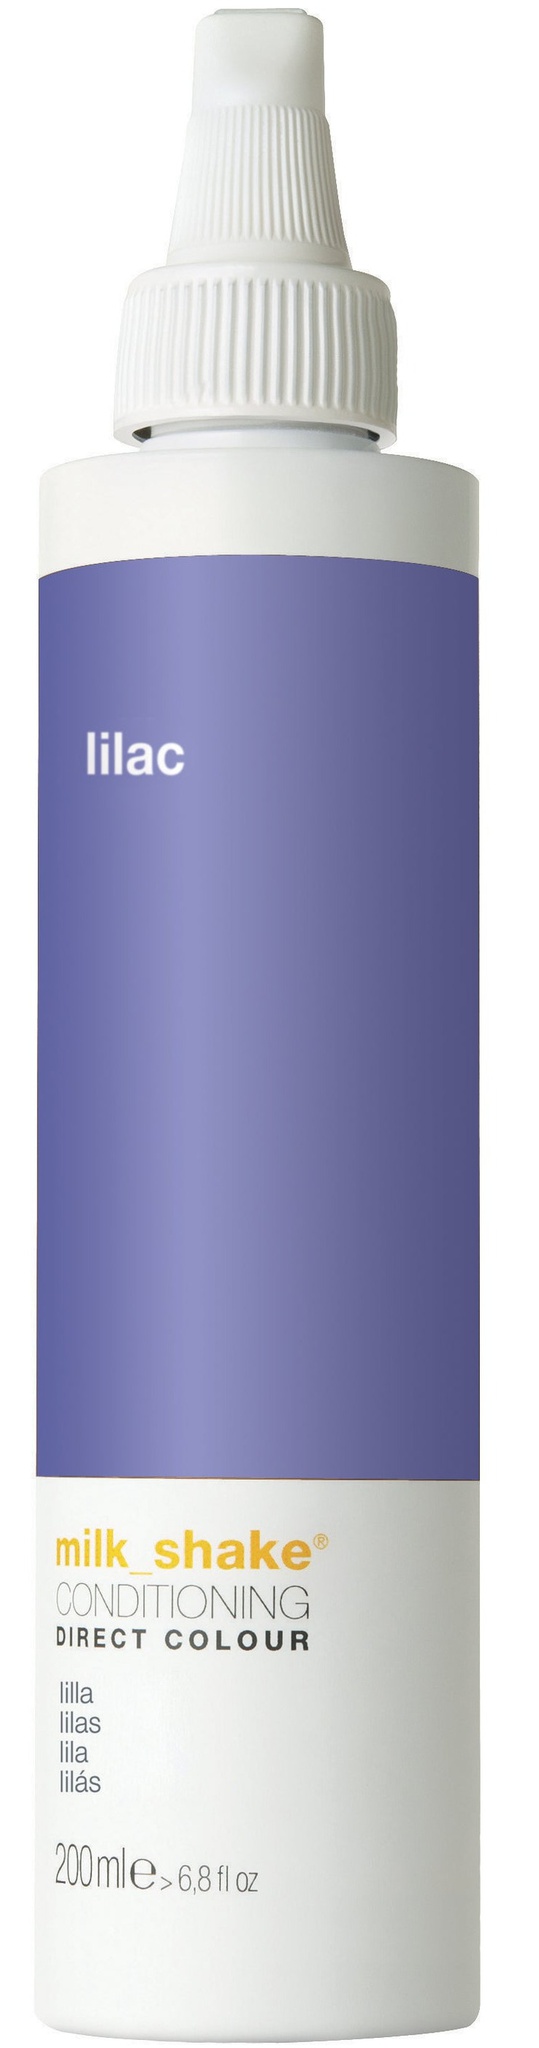 Milk shake Conditioning Direct Colour Lilac